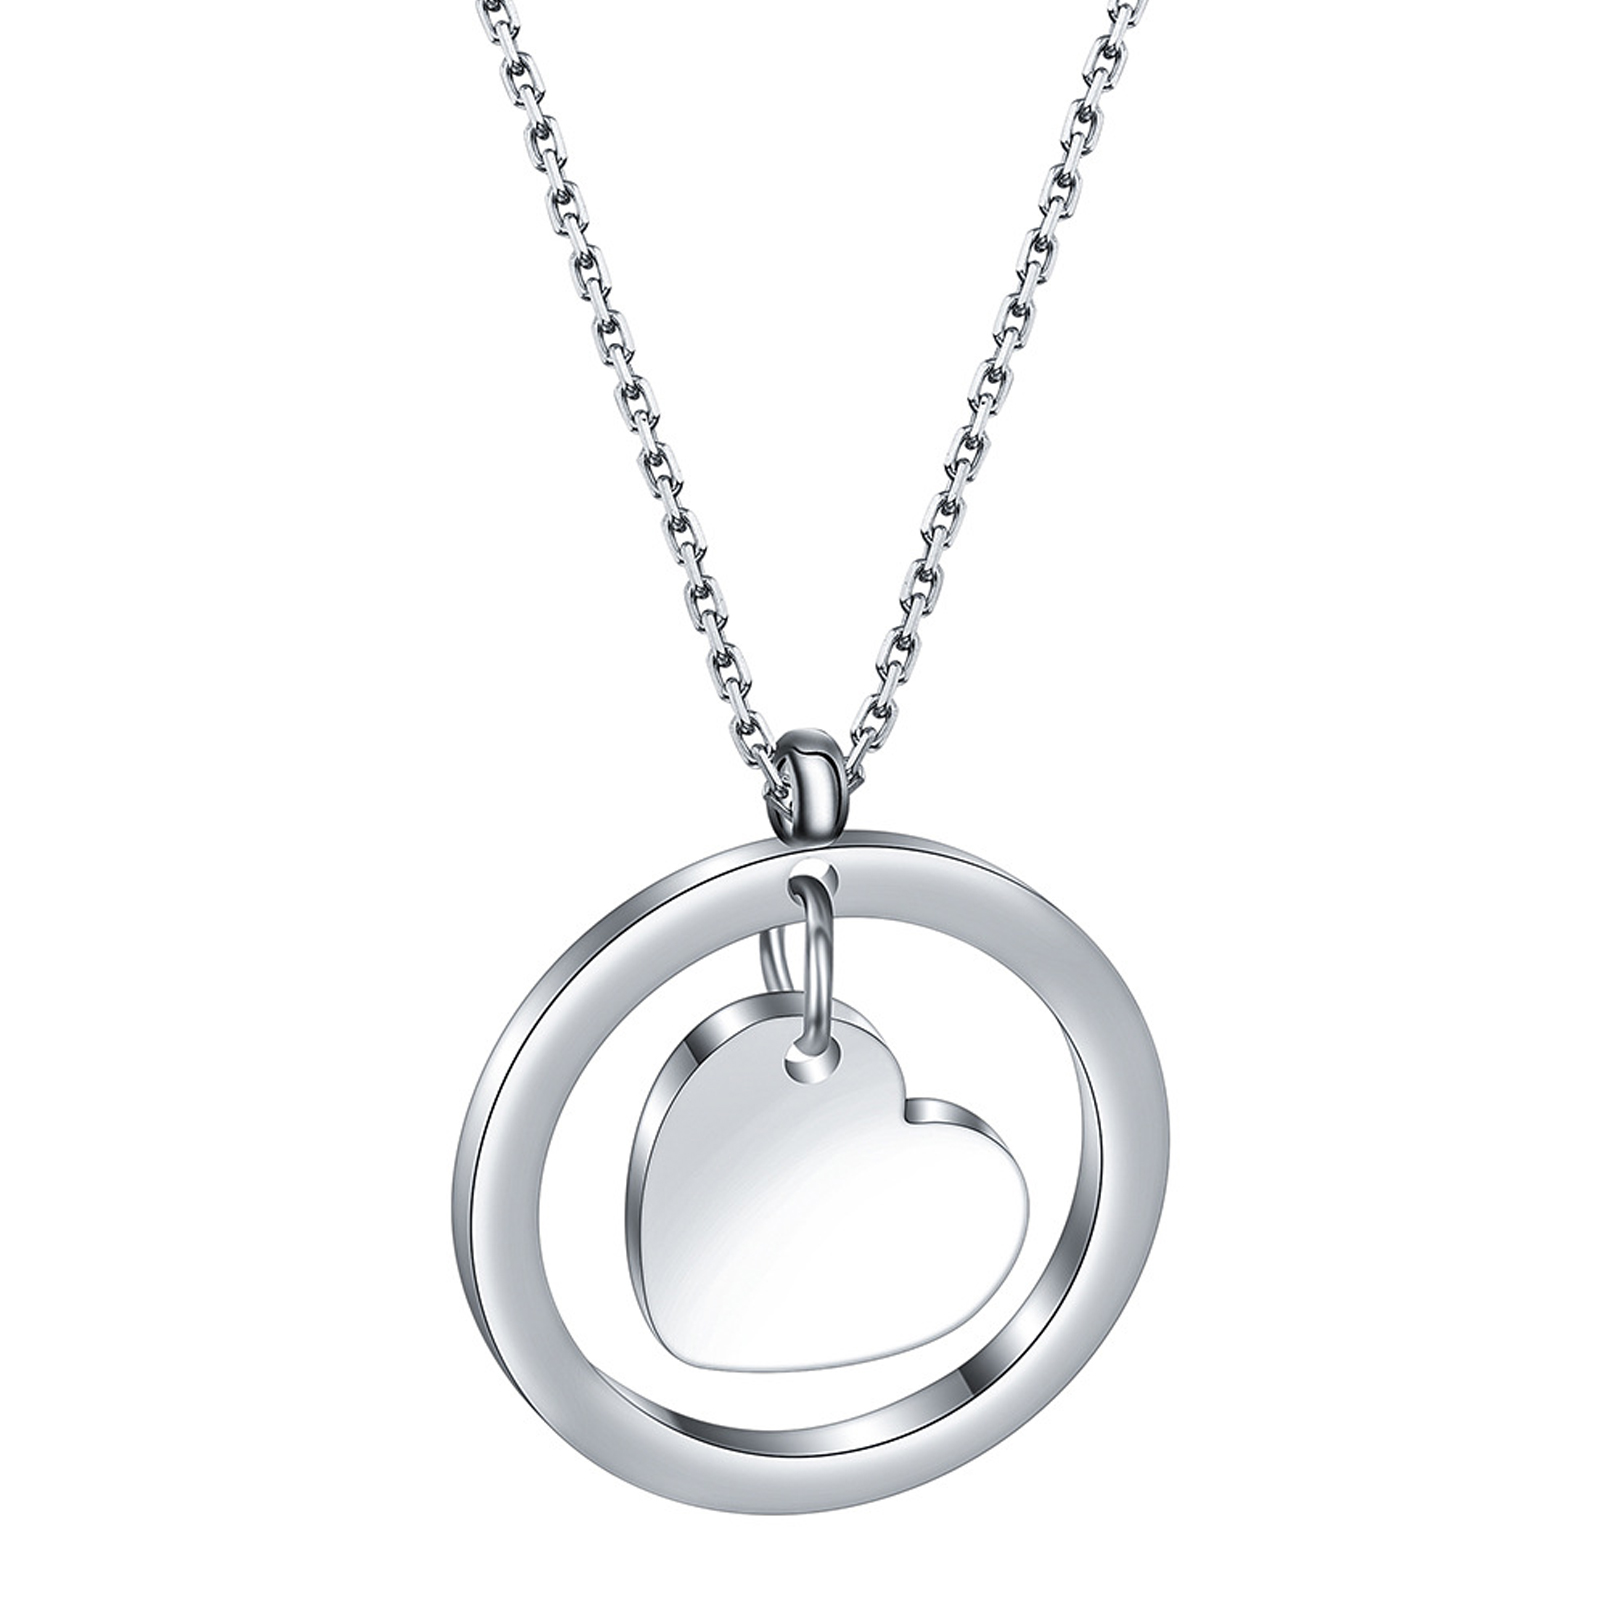 Picture of Stainless Steel Necklace Silver Tone Round Heart 40cm(15 6/8") long, 1 Piece